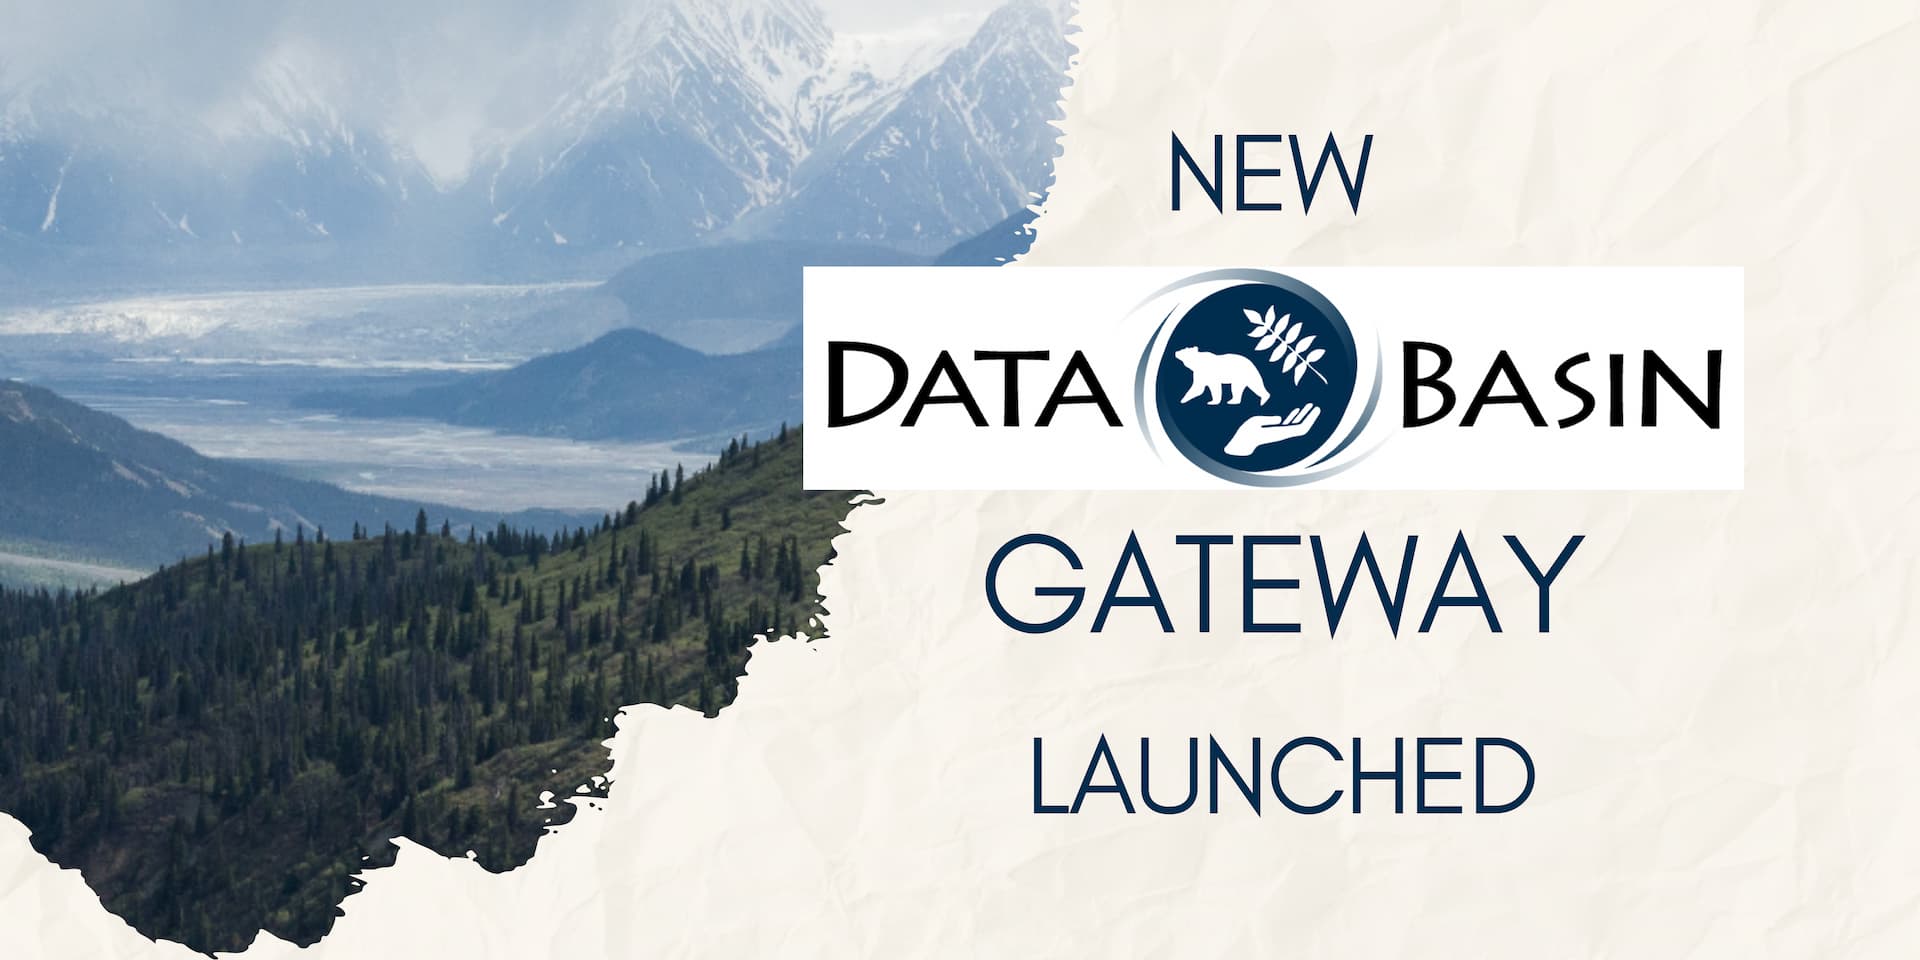 Paper-themed background with a mountain picture in the top left corner, with the words "New Data Basin Gateway Launched" on the right half